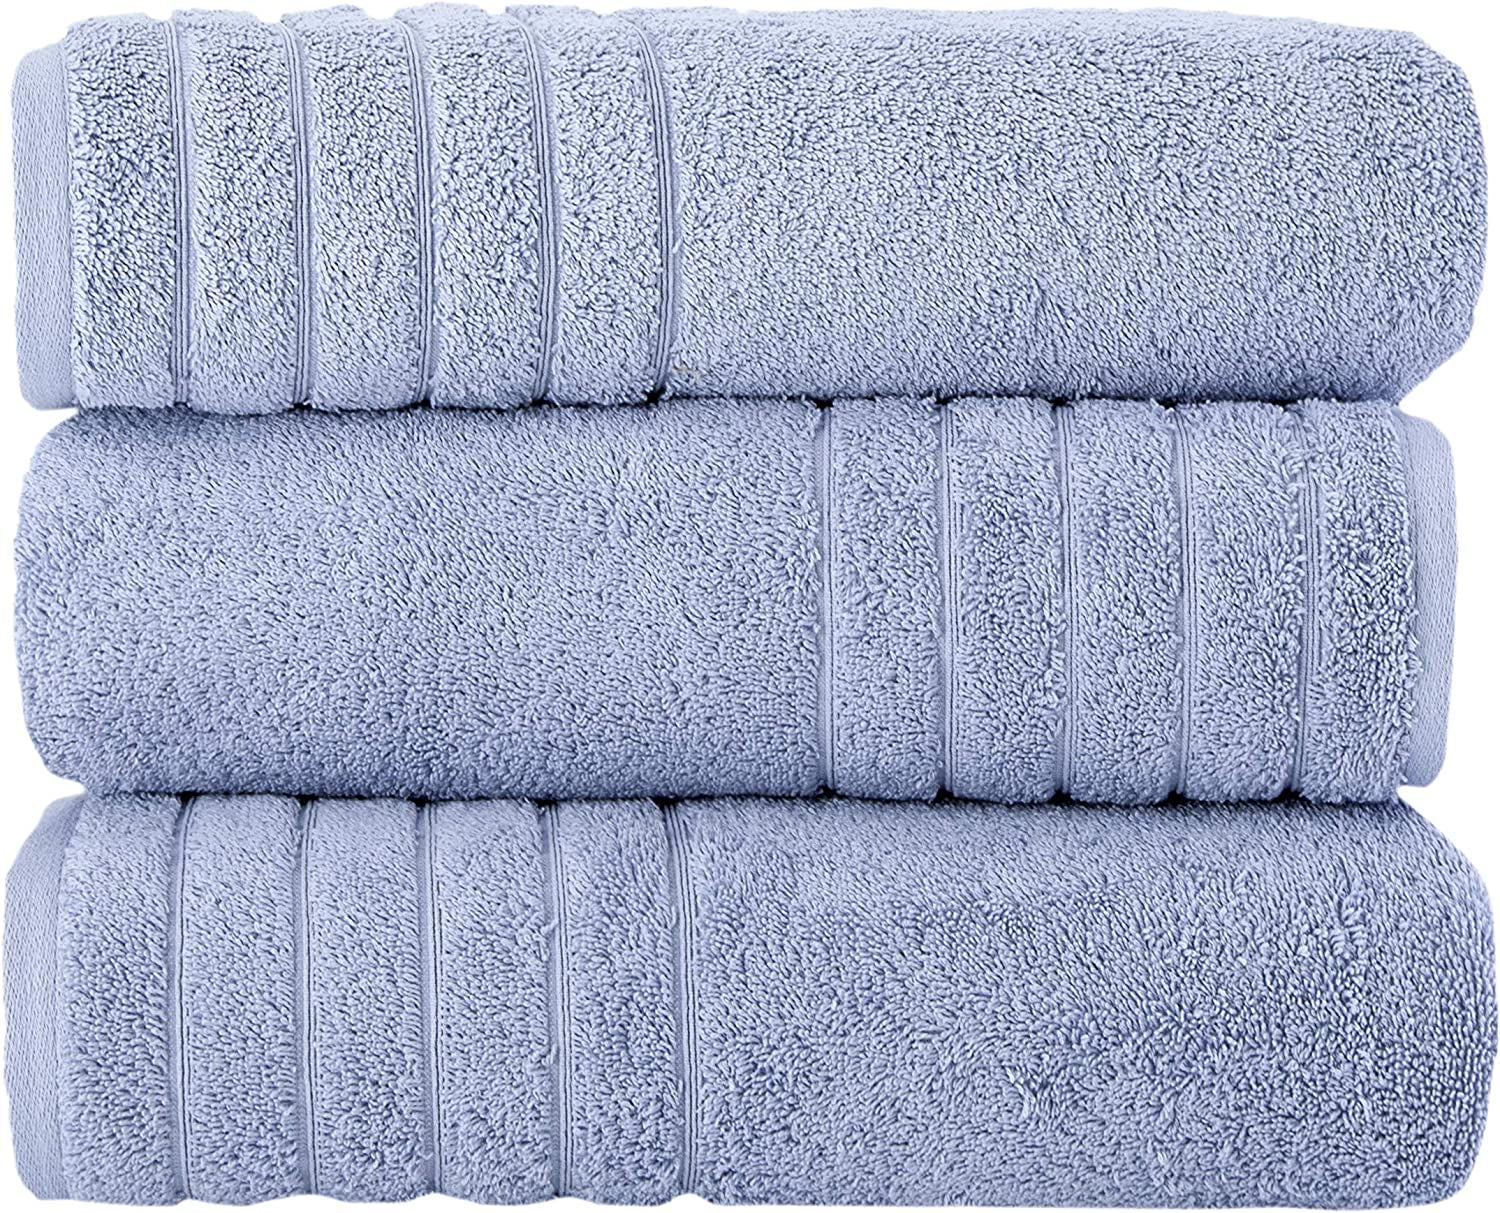 Barmum - Turkish Bath Towels Set of 3 - Premium Quality Made with 100% Turkish Cotton, Spa & Hotel Towels, Absorbent & Comfy Bath Towels | 30"X56" (Blue)